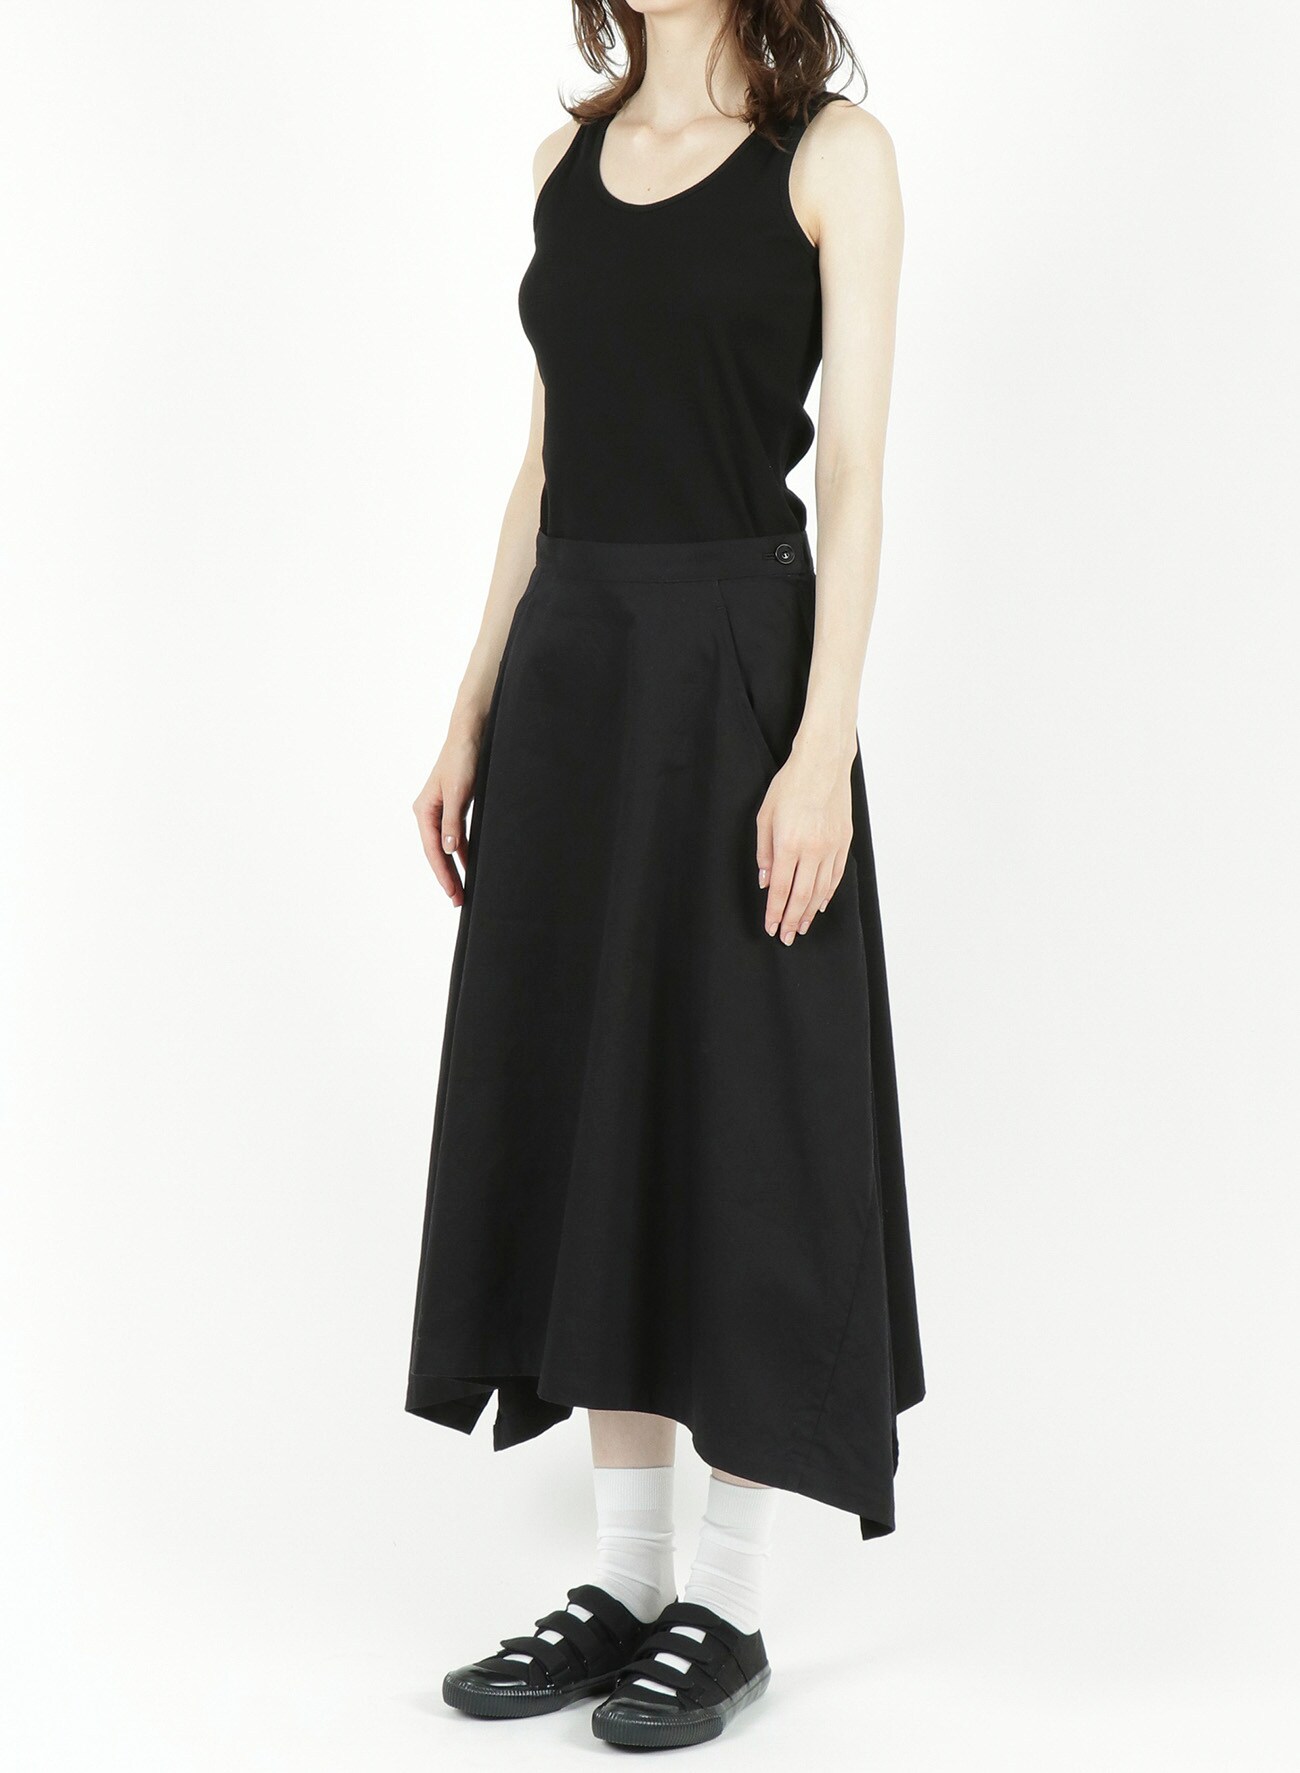 [Y's BORN PRODUCT]COTTON TWILL SIDE FLARE SKIRT